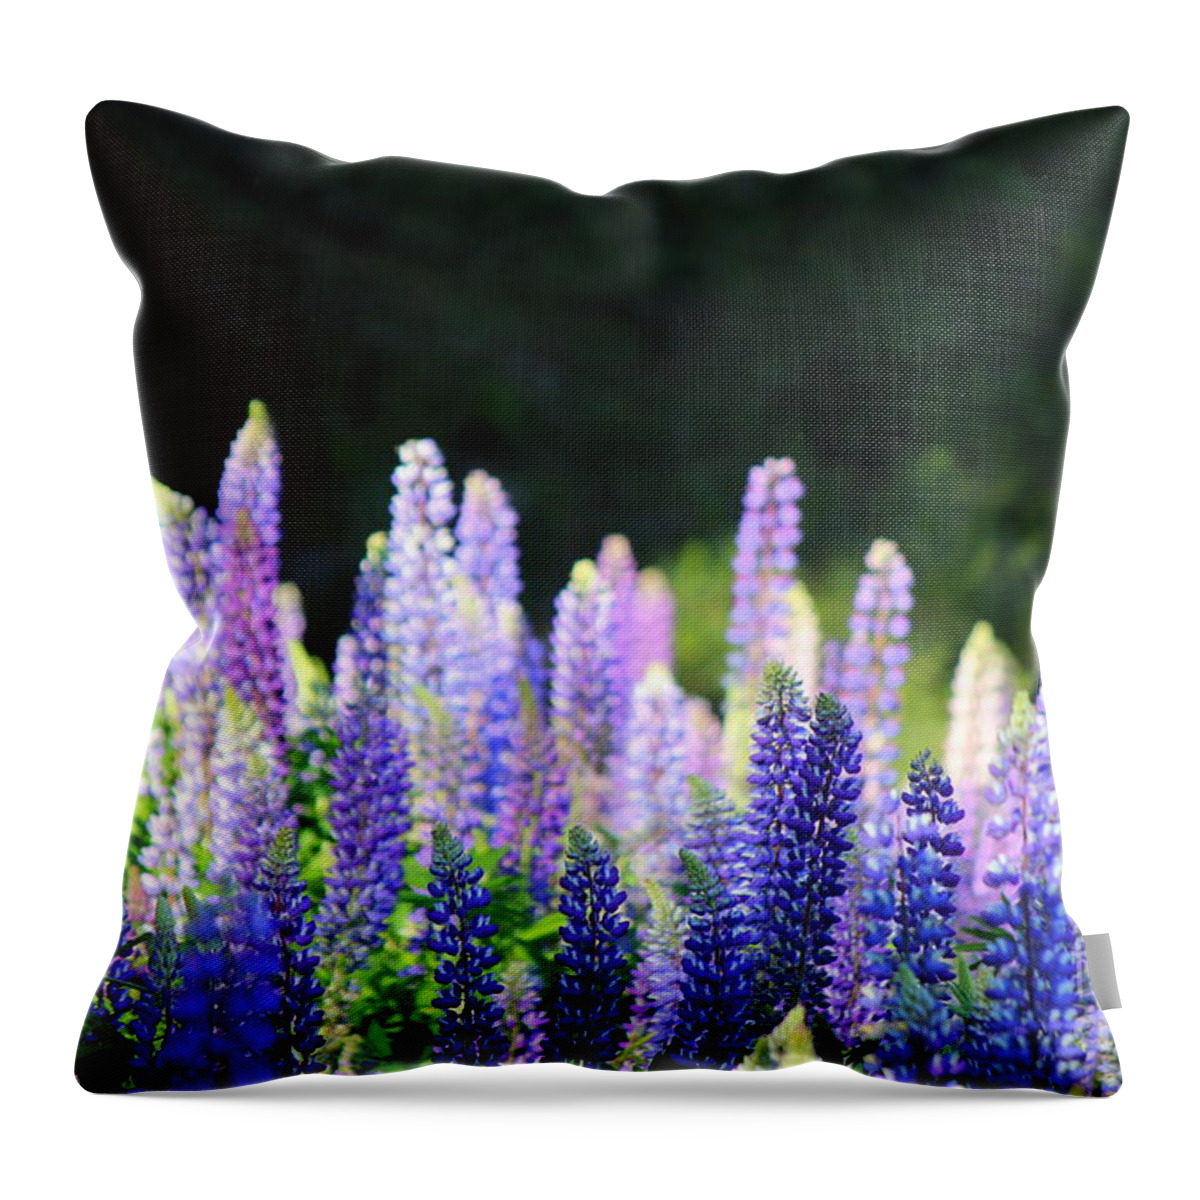  Throw Pillow featuring the photograph Illuminated Lupines by Hanni Stoklosa